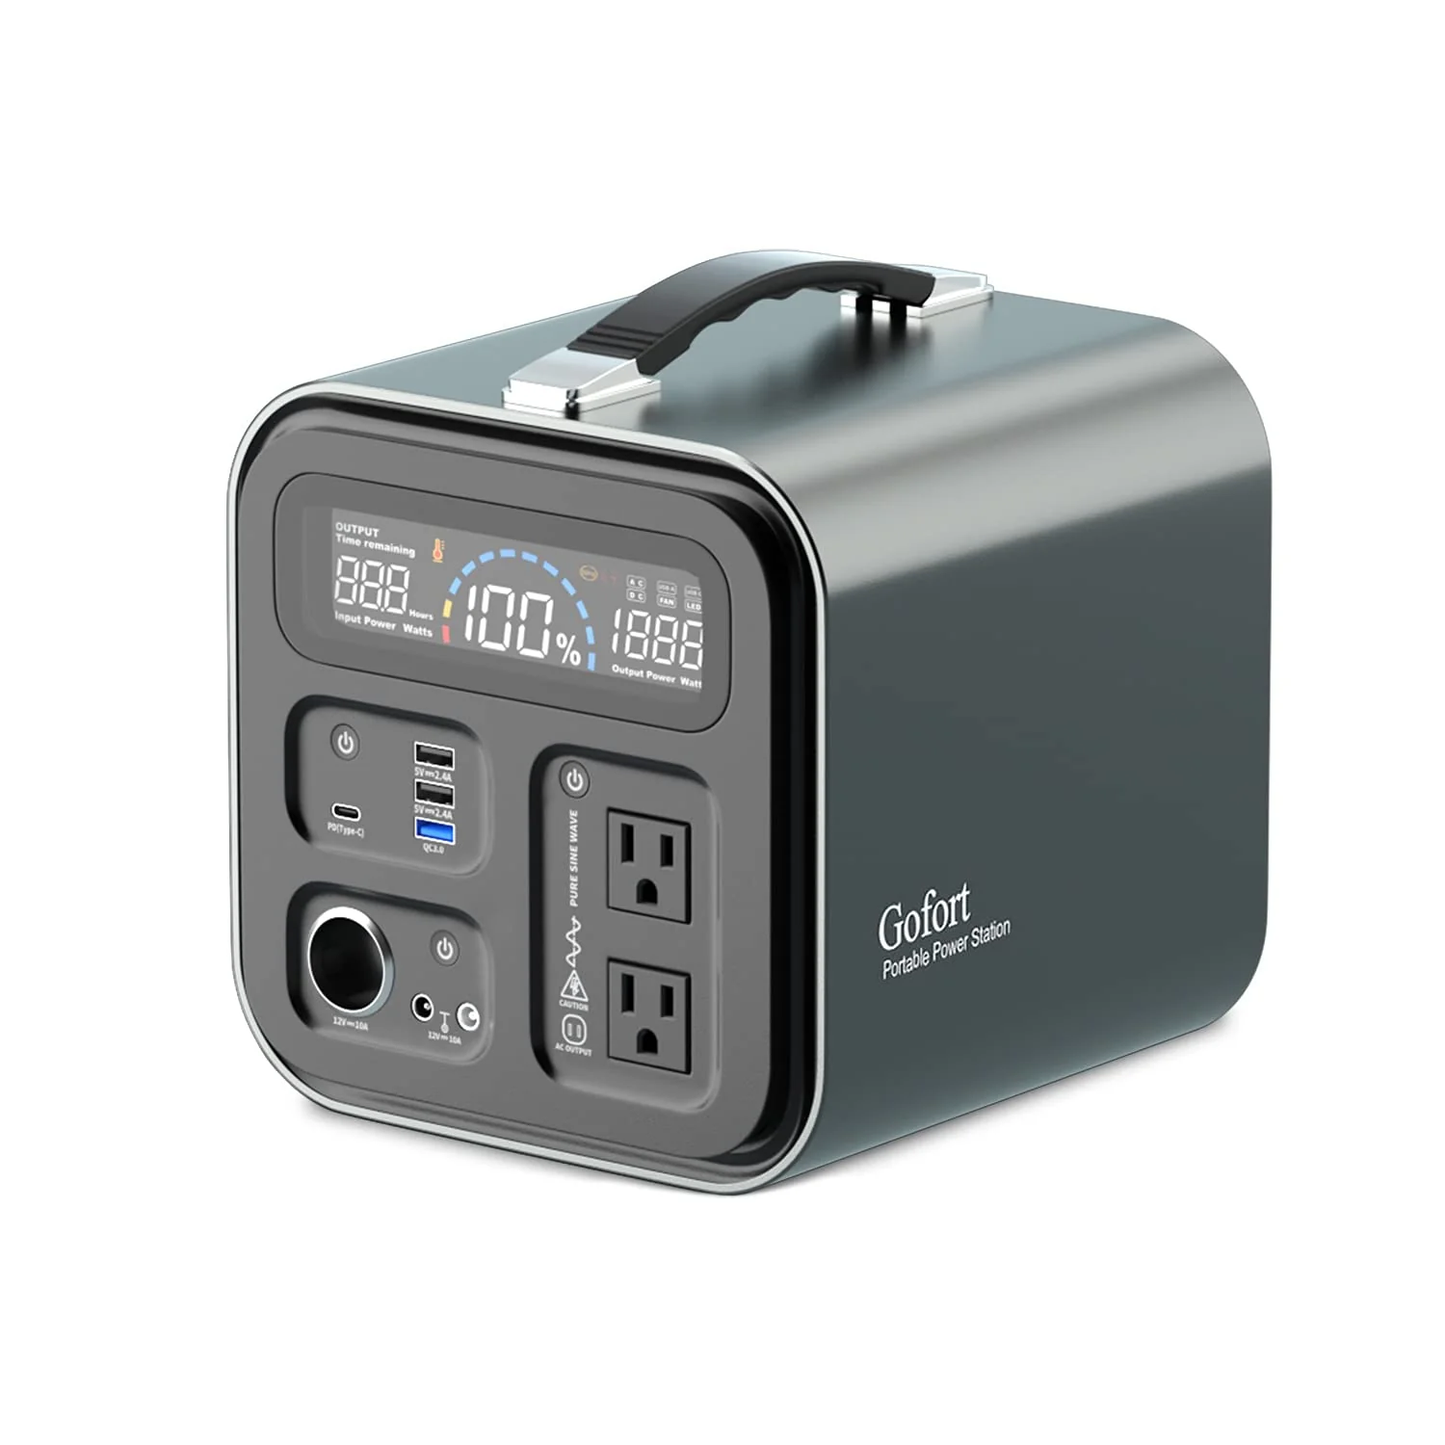 Gofort 600W Portable Power Station